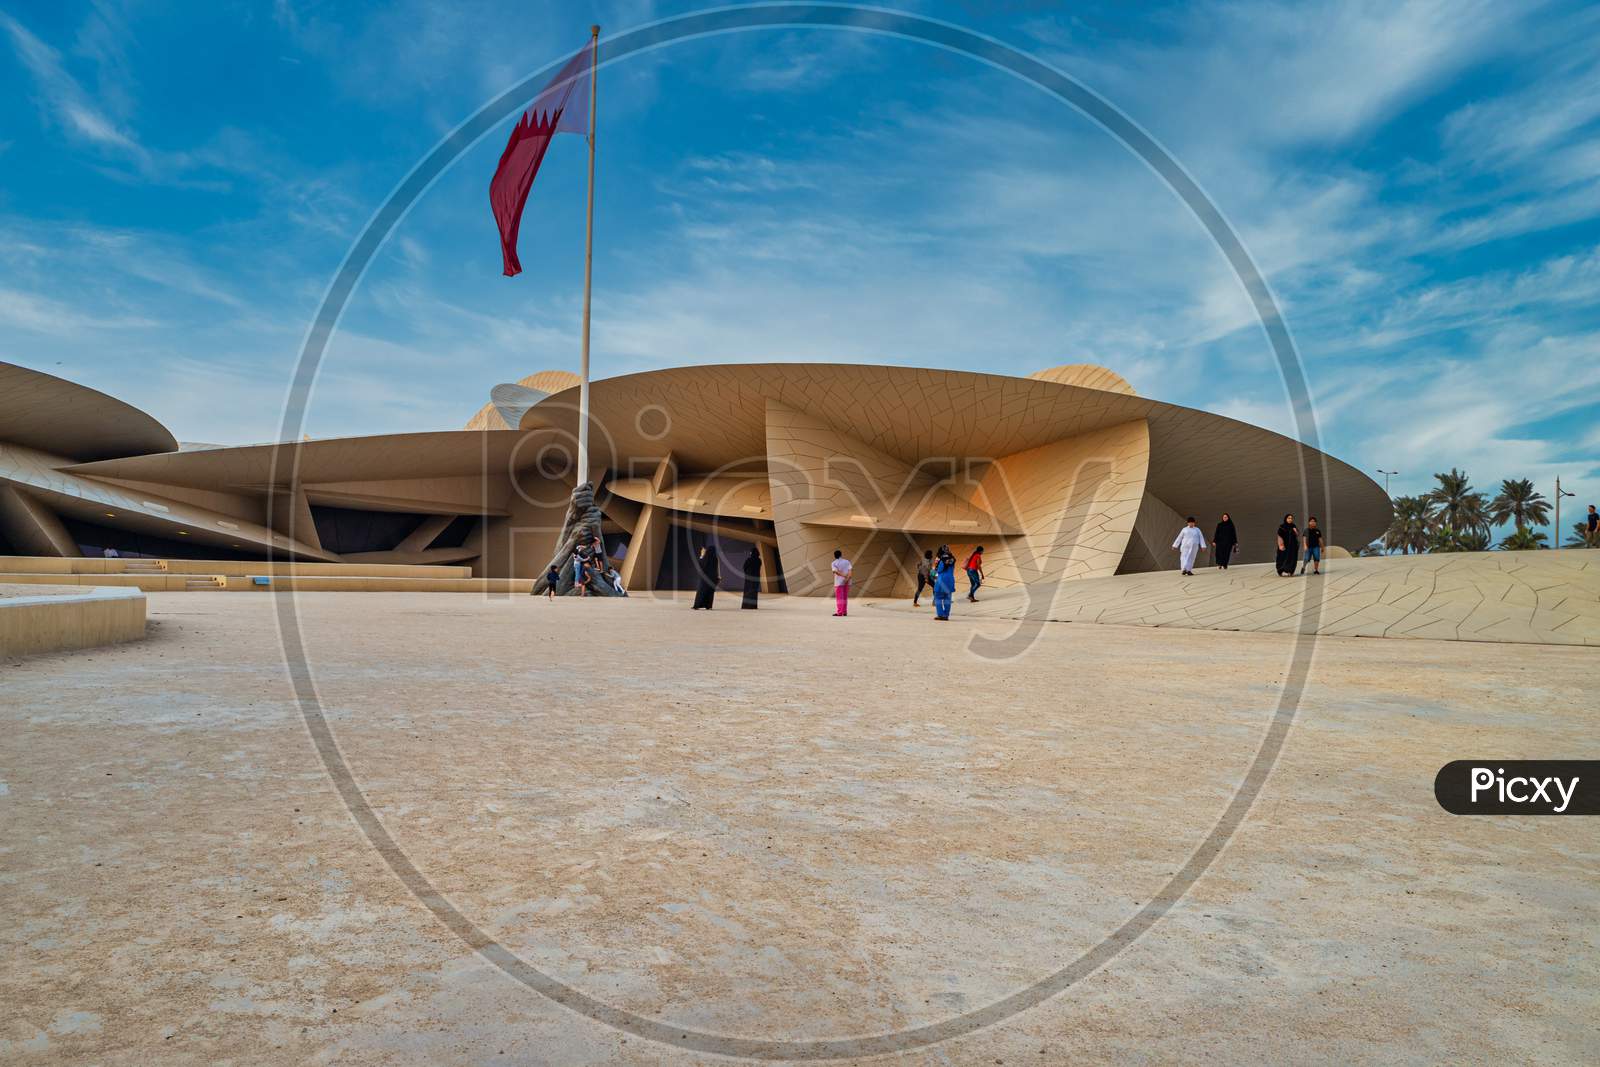 National Museum of Qatar (Desert rose) exterior  daylight view with  Qatar flag and clouds in sky